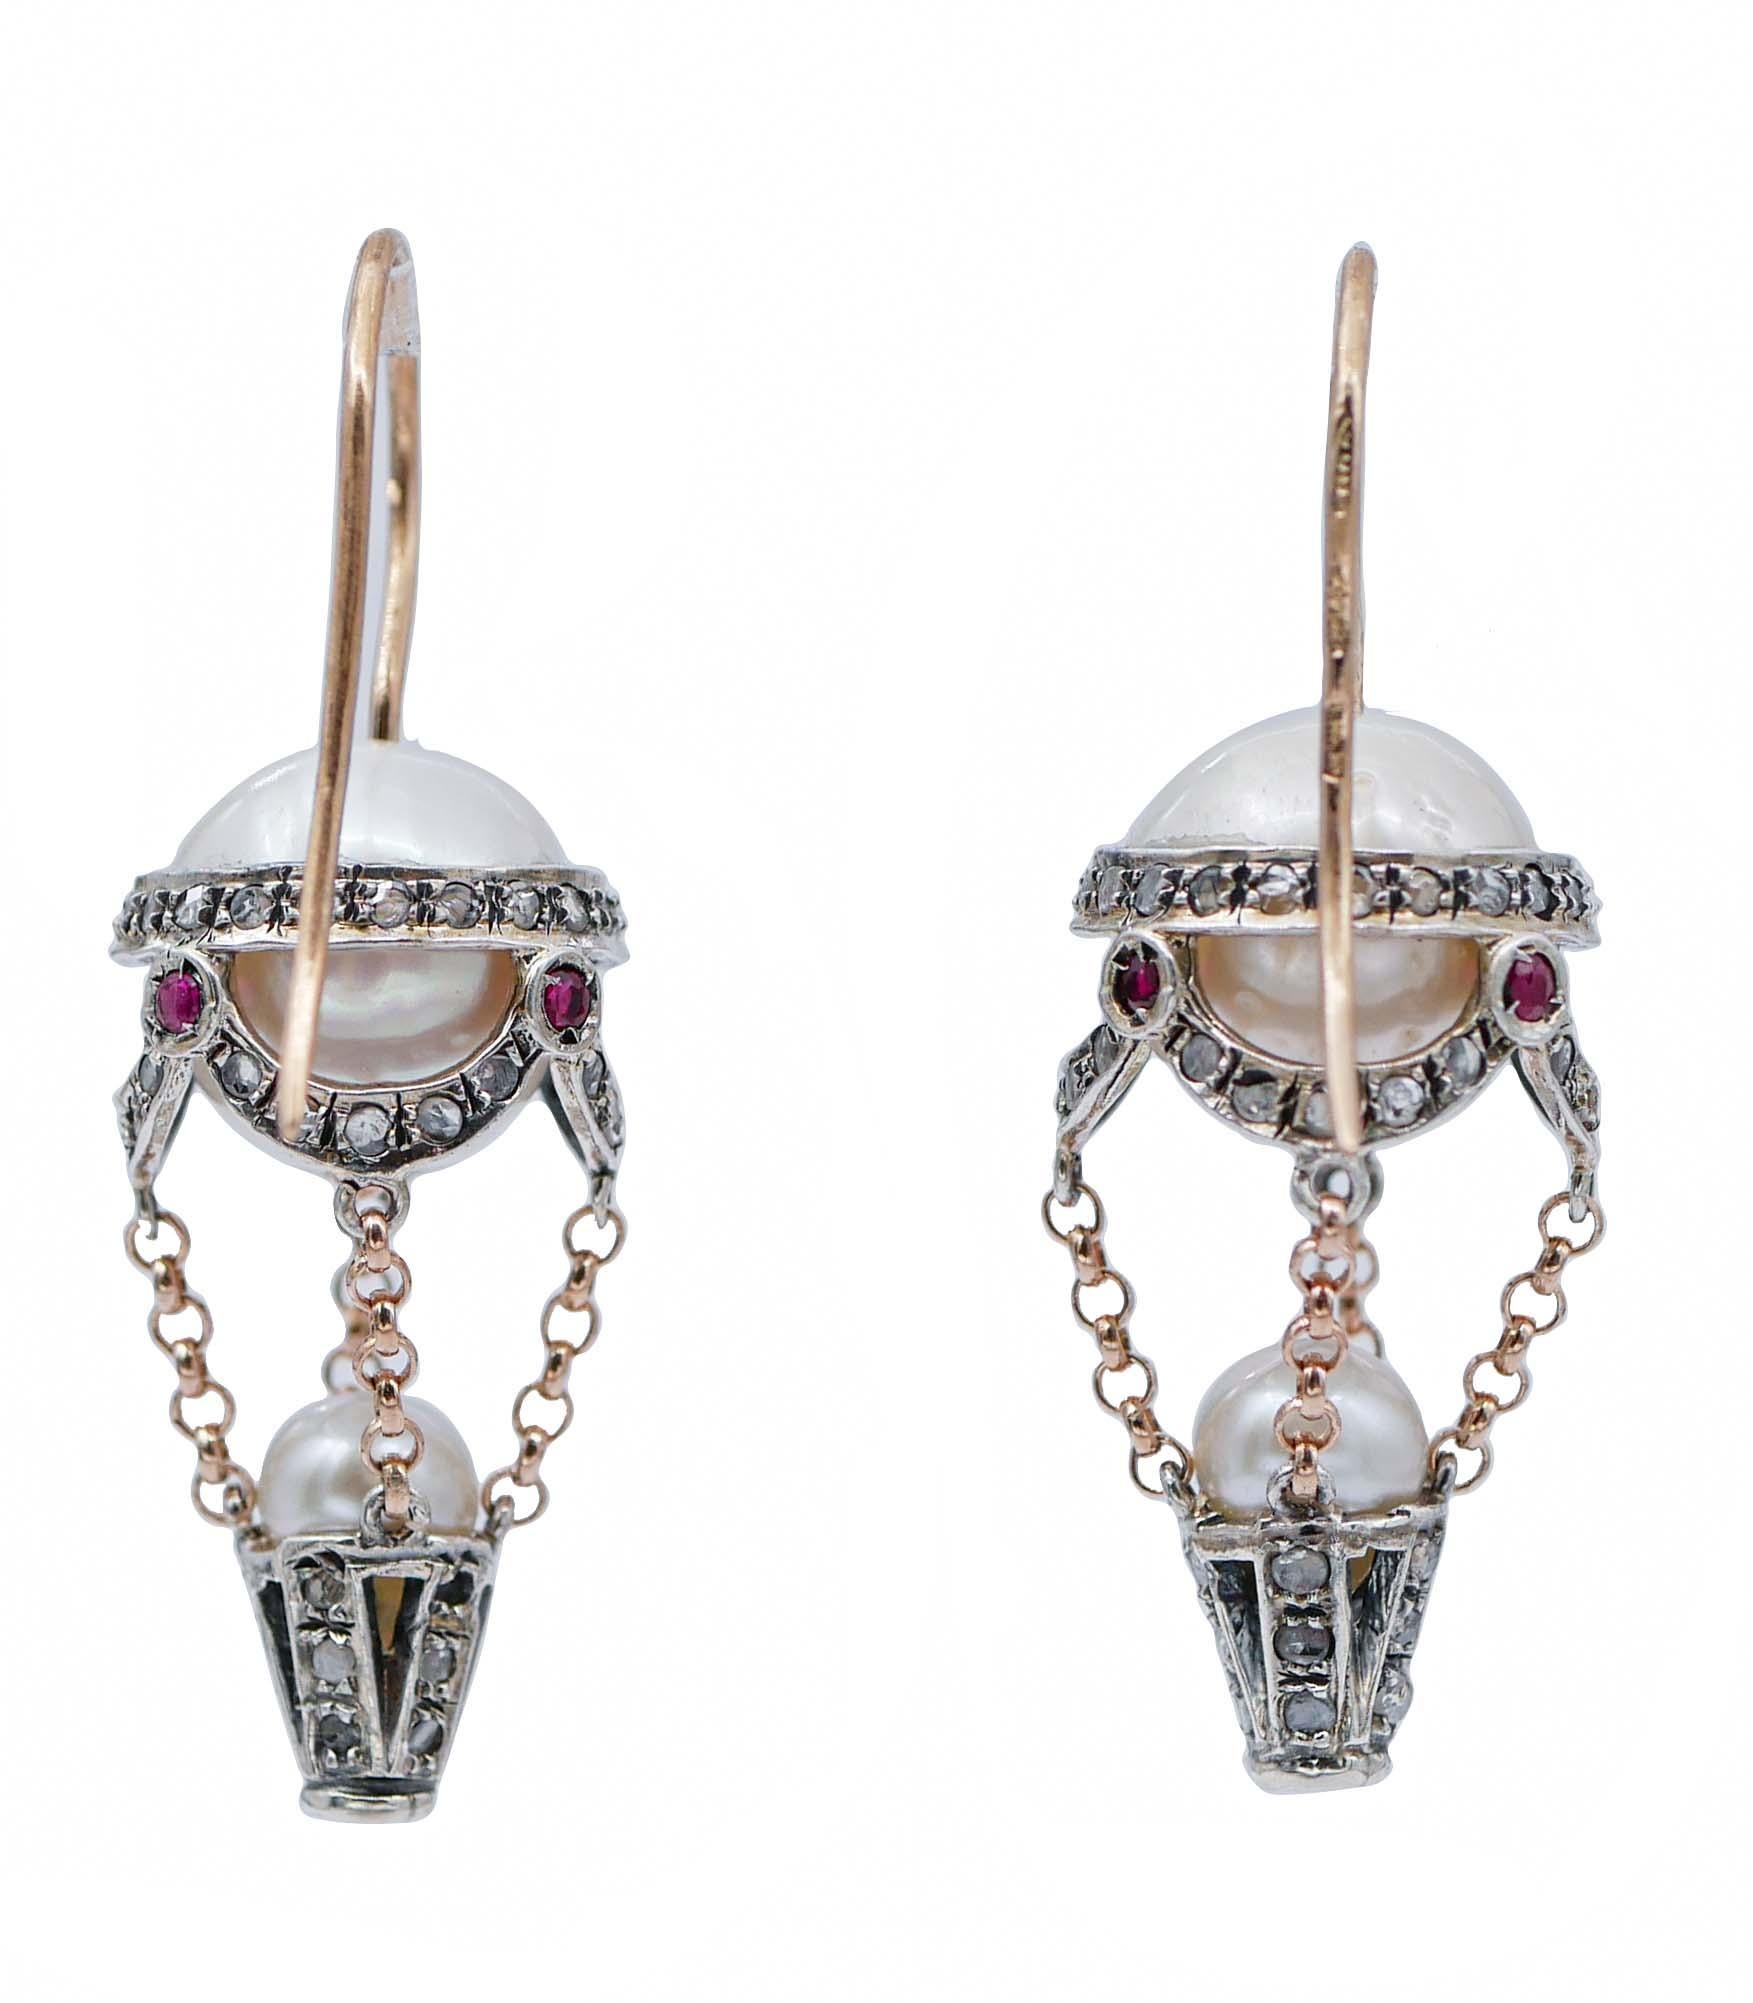 Retro Pearls, Rubies, Diamonds, Rose Gold and Silver Hot Air Balloon Earrings For Sale